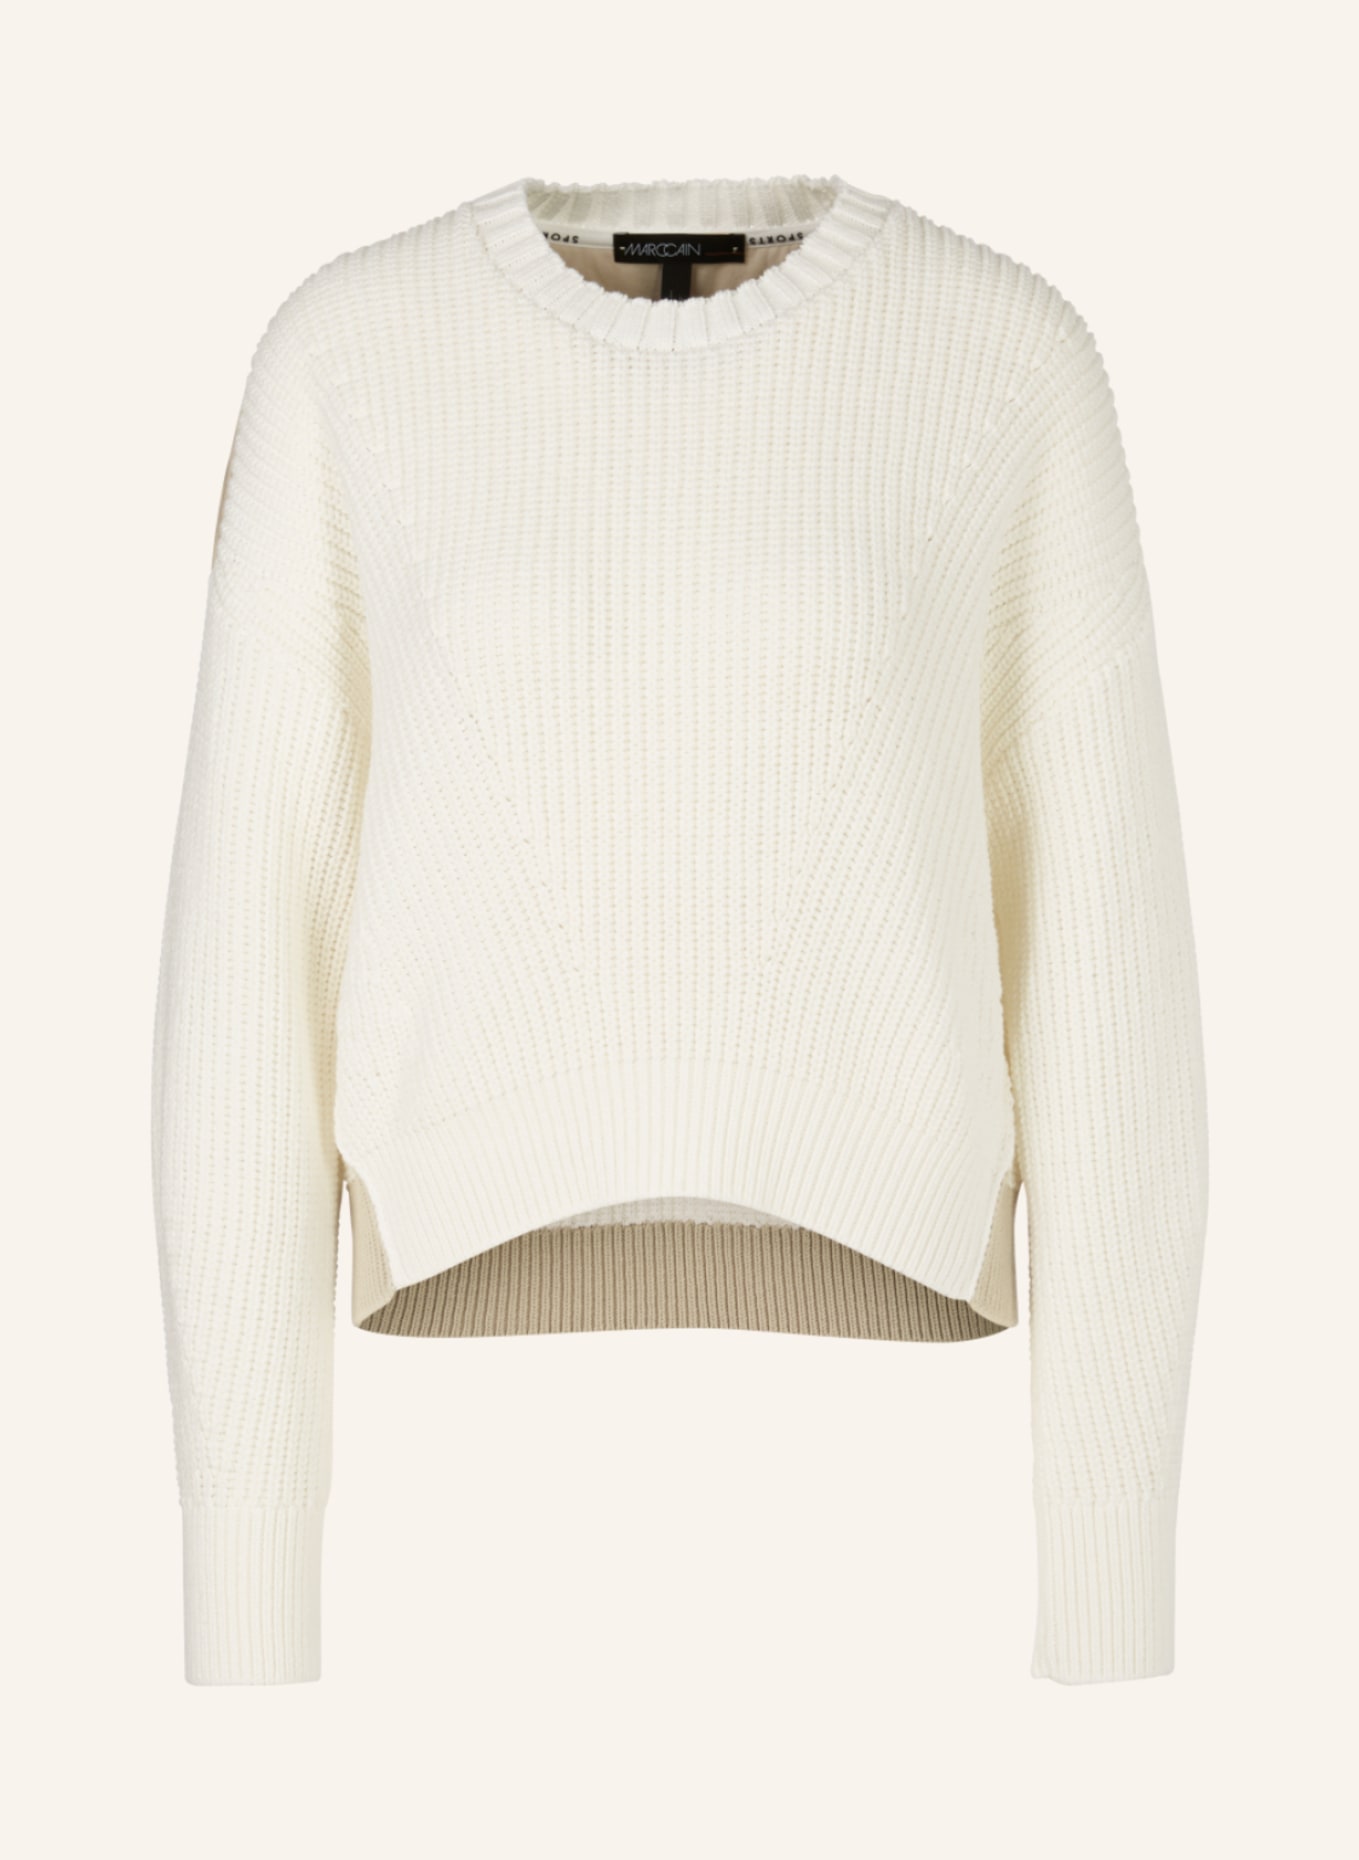 MARC CAIN Pullover, Farbe: WEISS/ CREME (Bild 1)